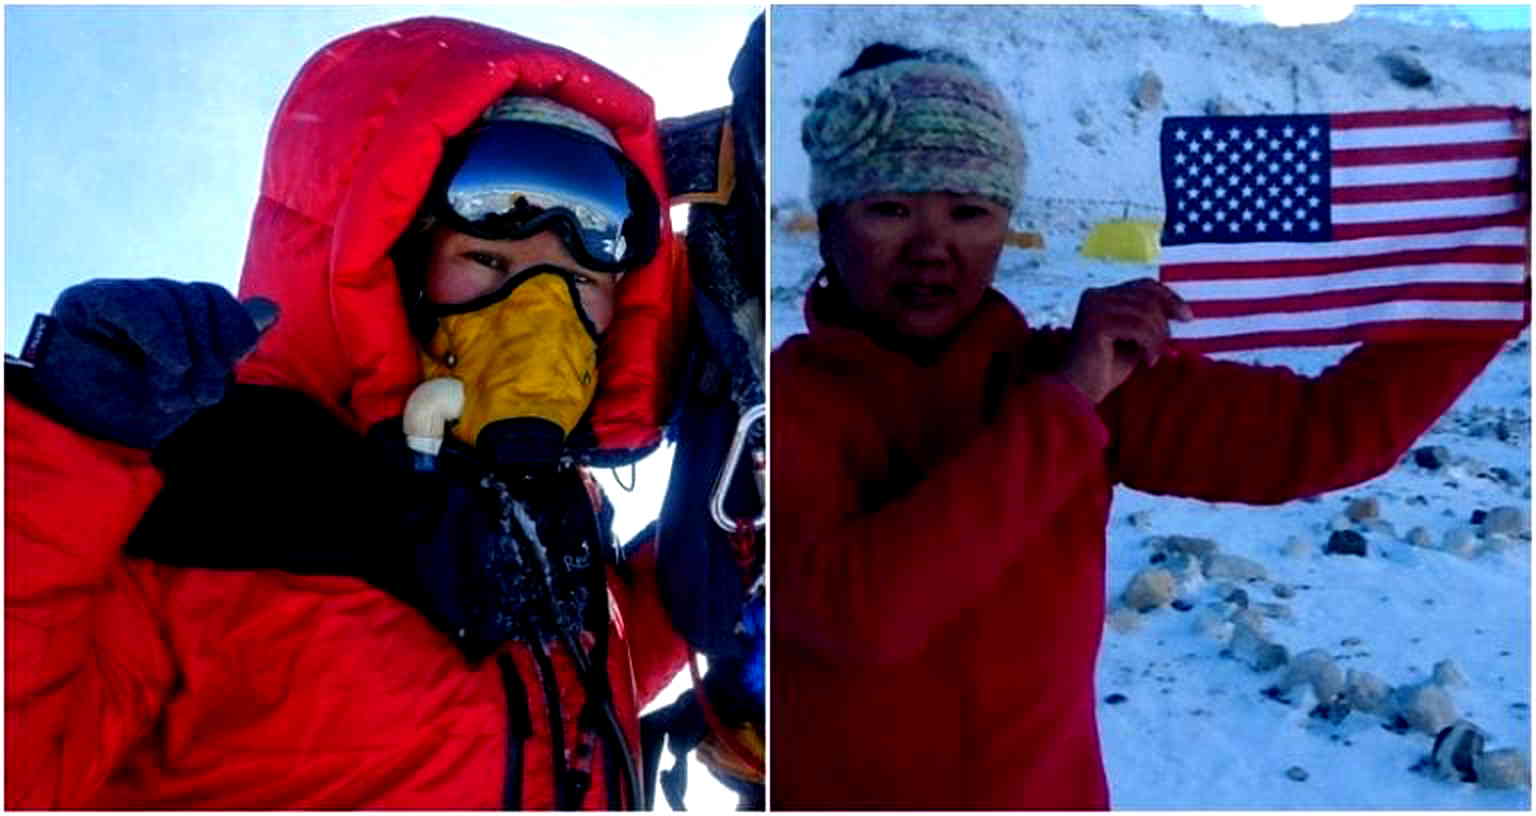 Woman Who Climbed Mount Everest 9 Times Makes $11 an Hour Washing Dishes at Whole Foods